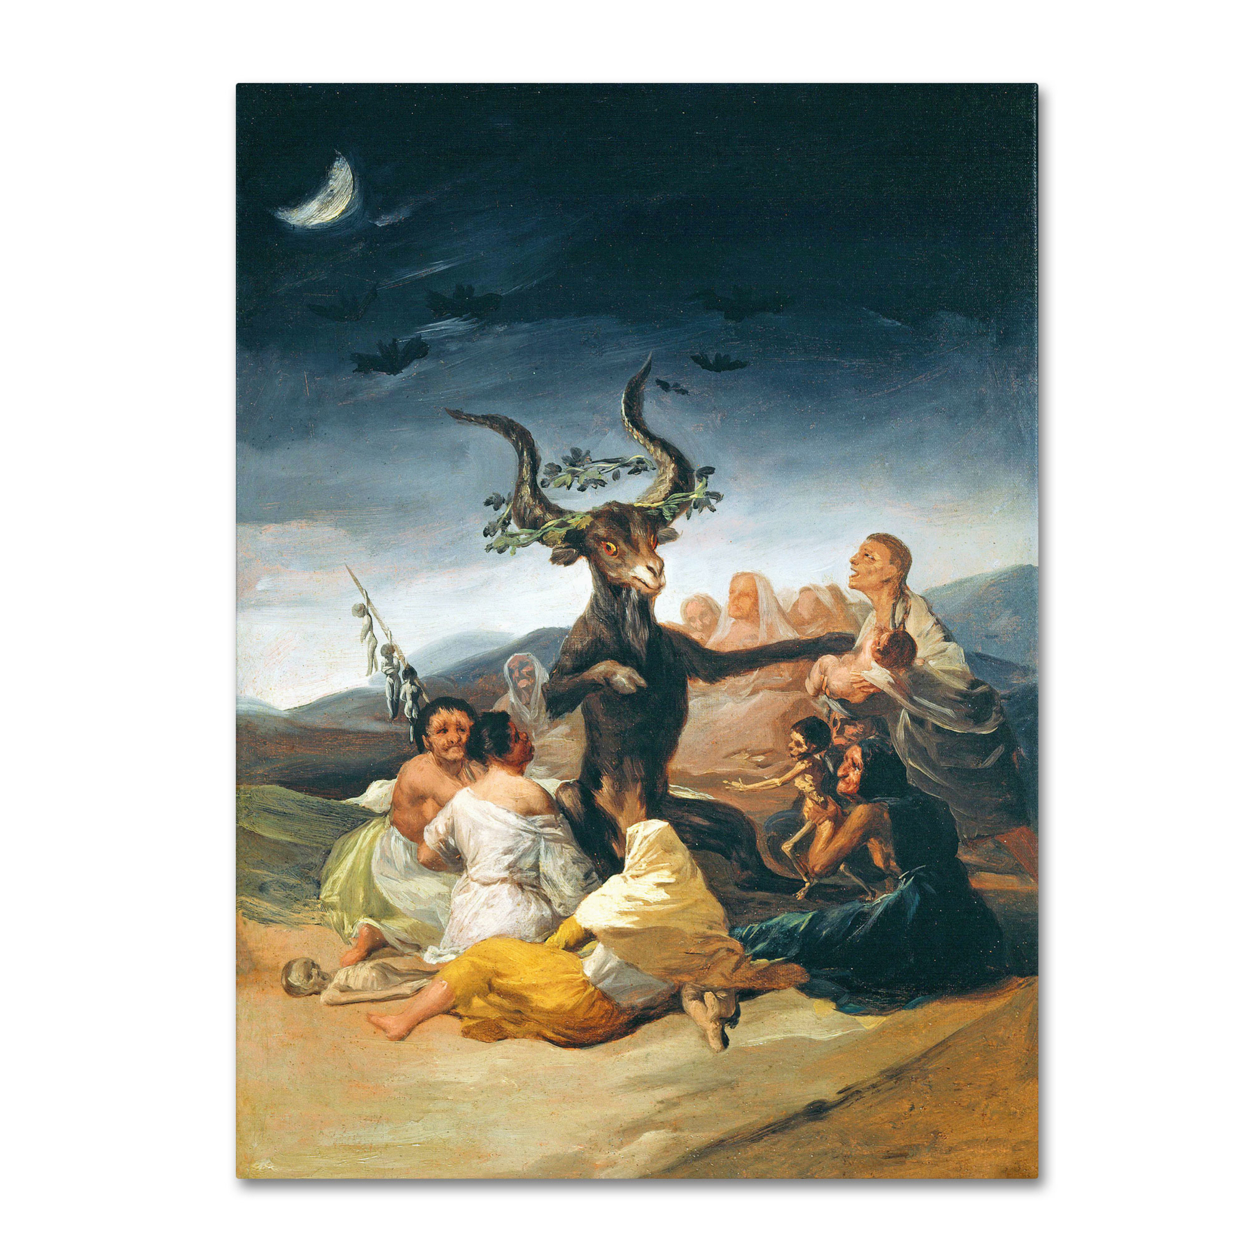 Francisco Goya 'The Witches' Sabbath 1797-98' Canvas Wall Art 35 X 47 Inches